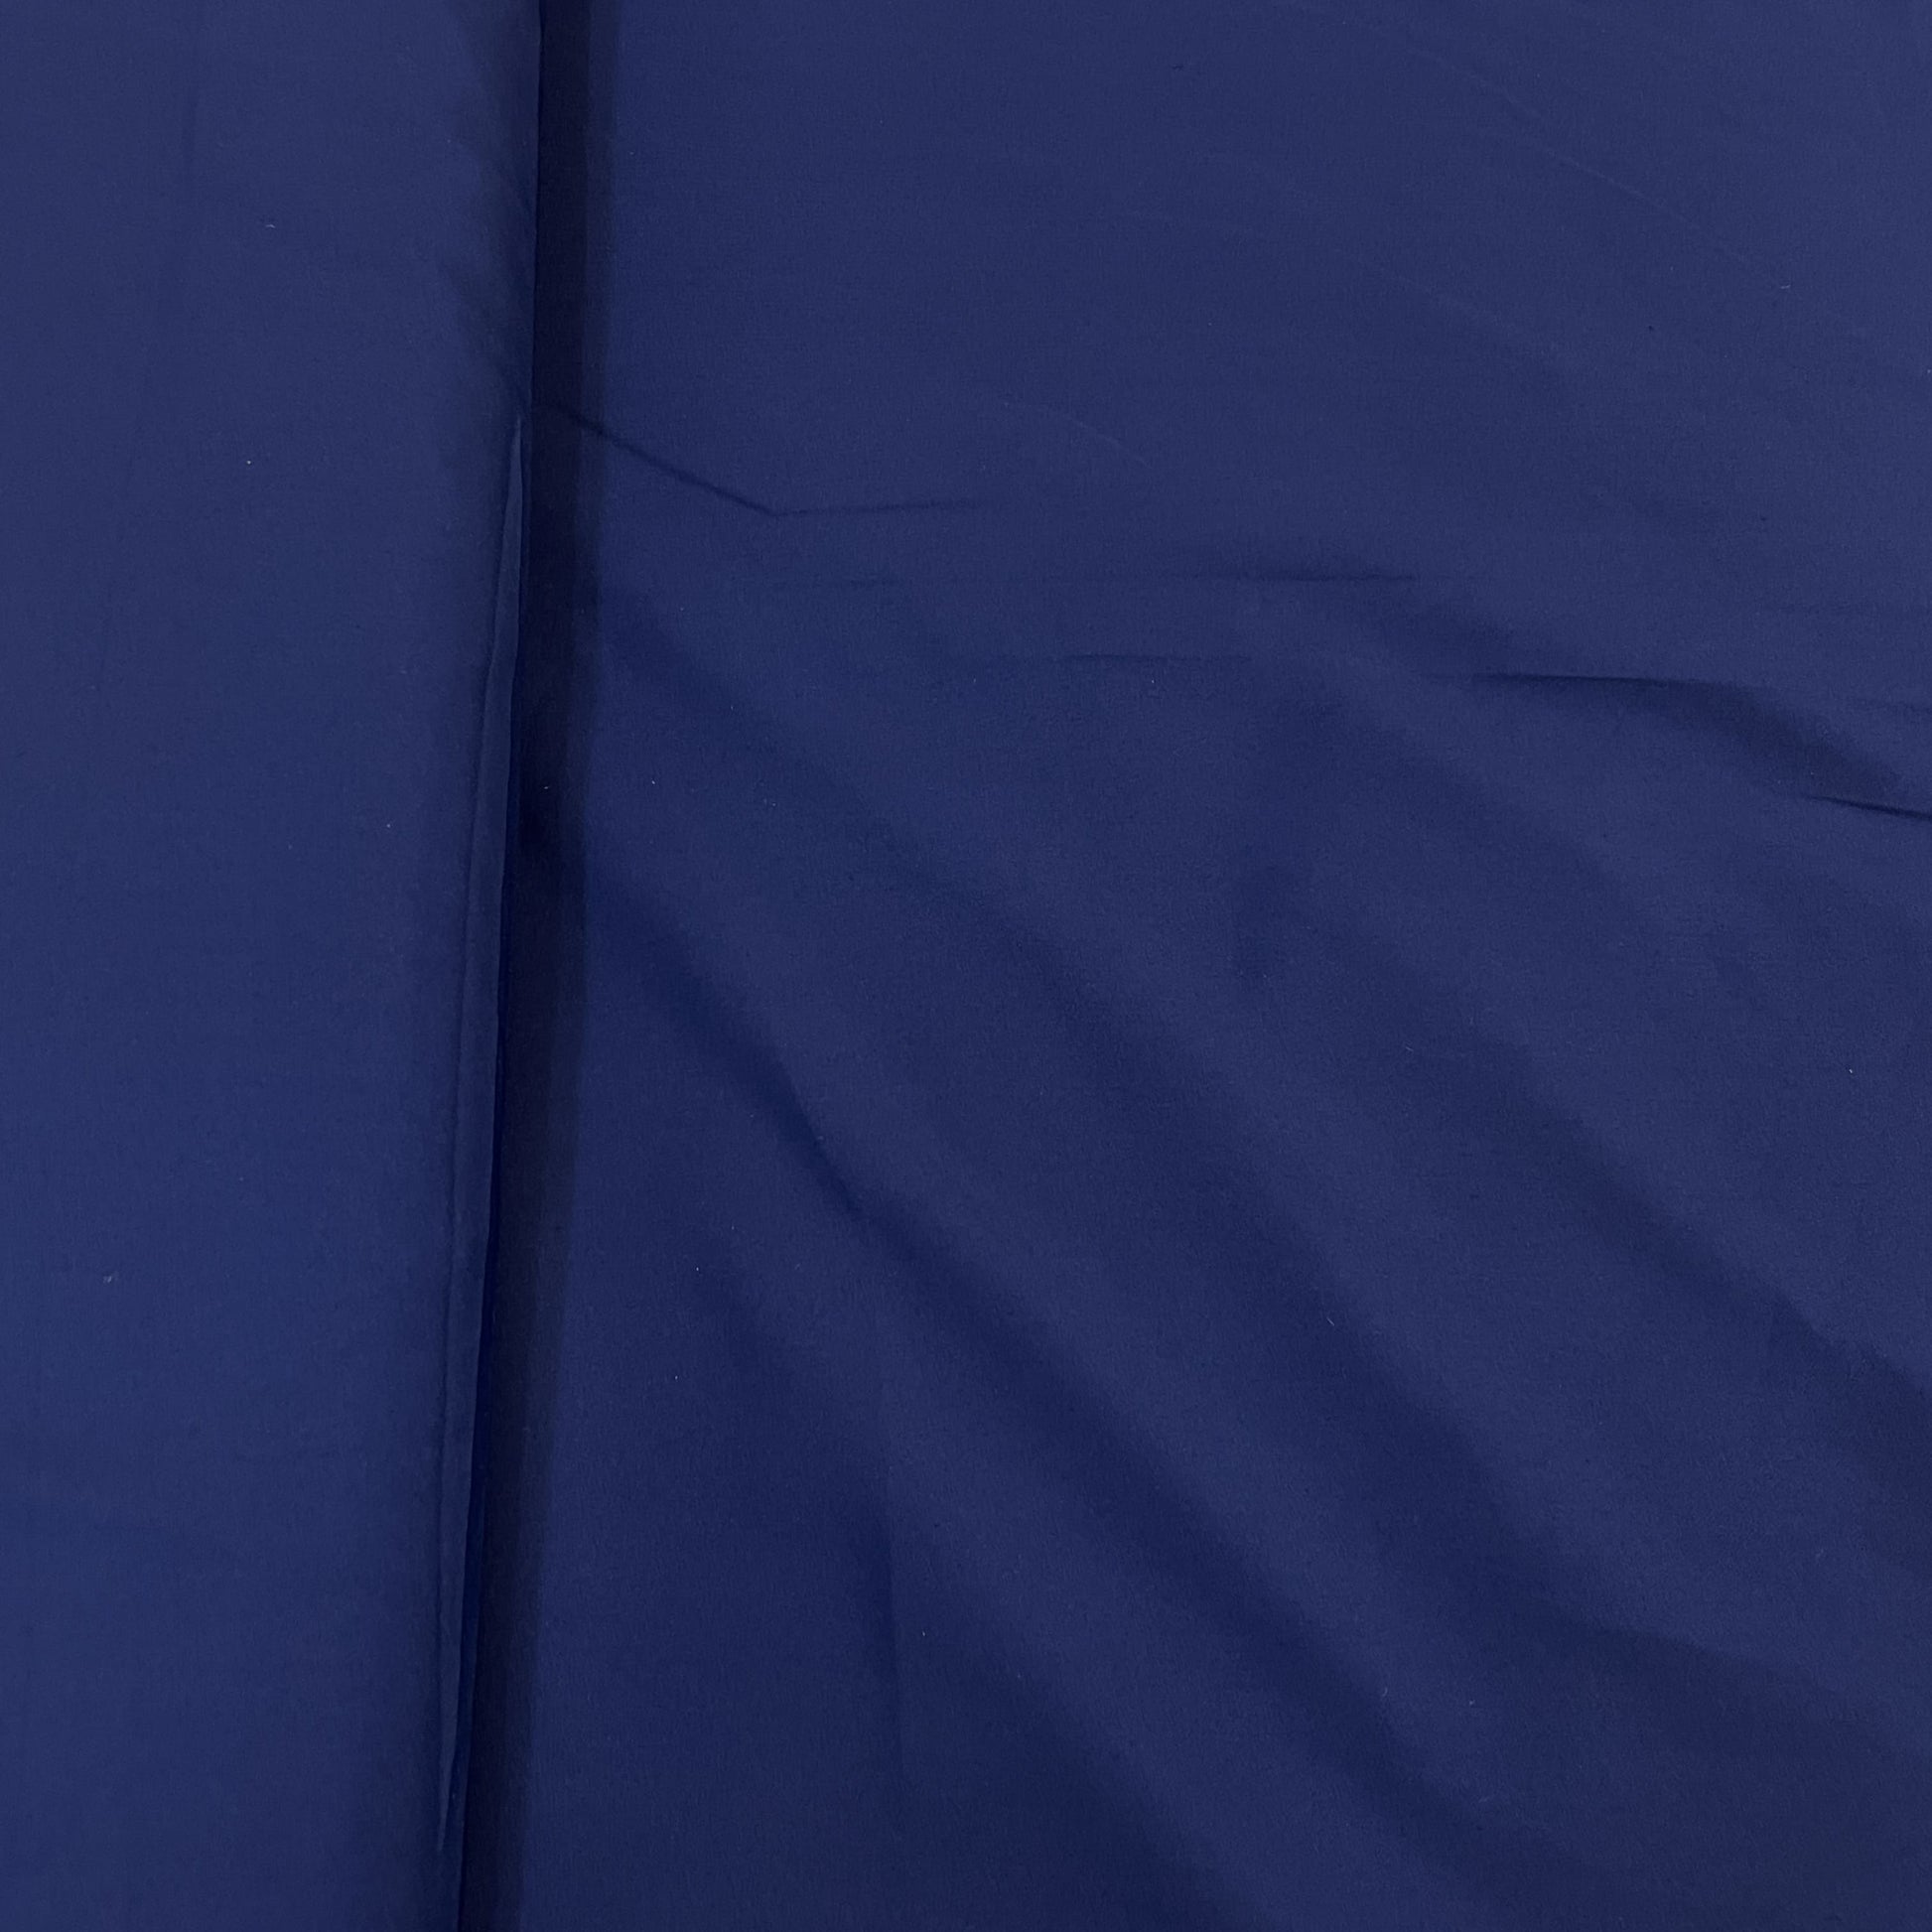 Exclusive Navy Blue Solid Malai Crepe Fabric